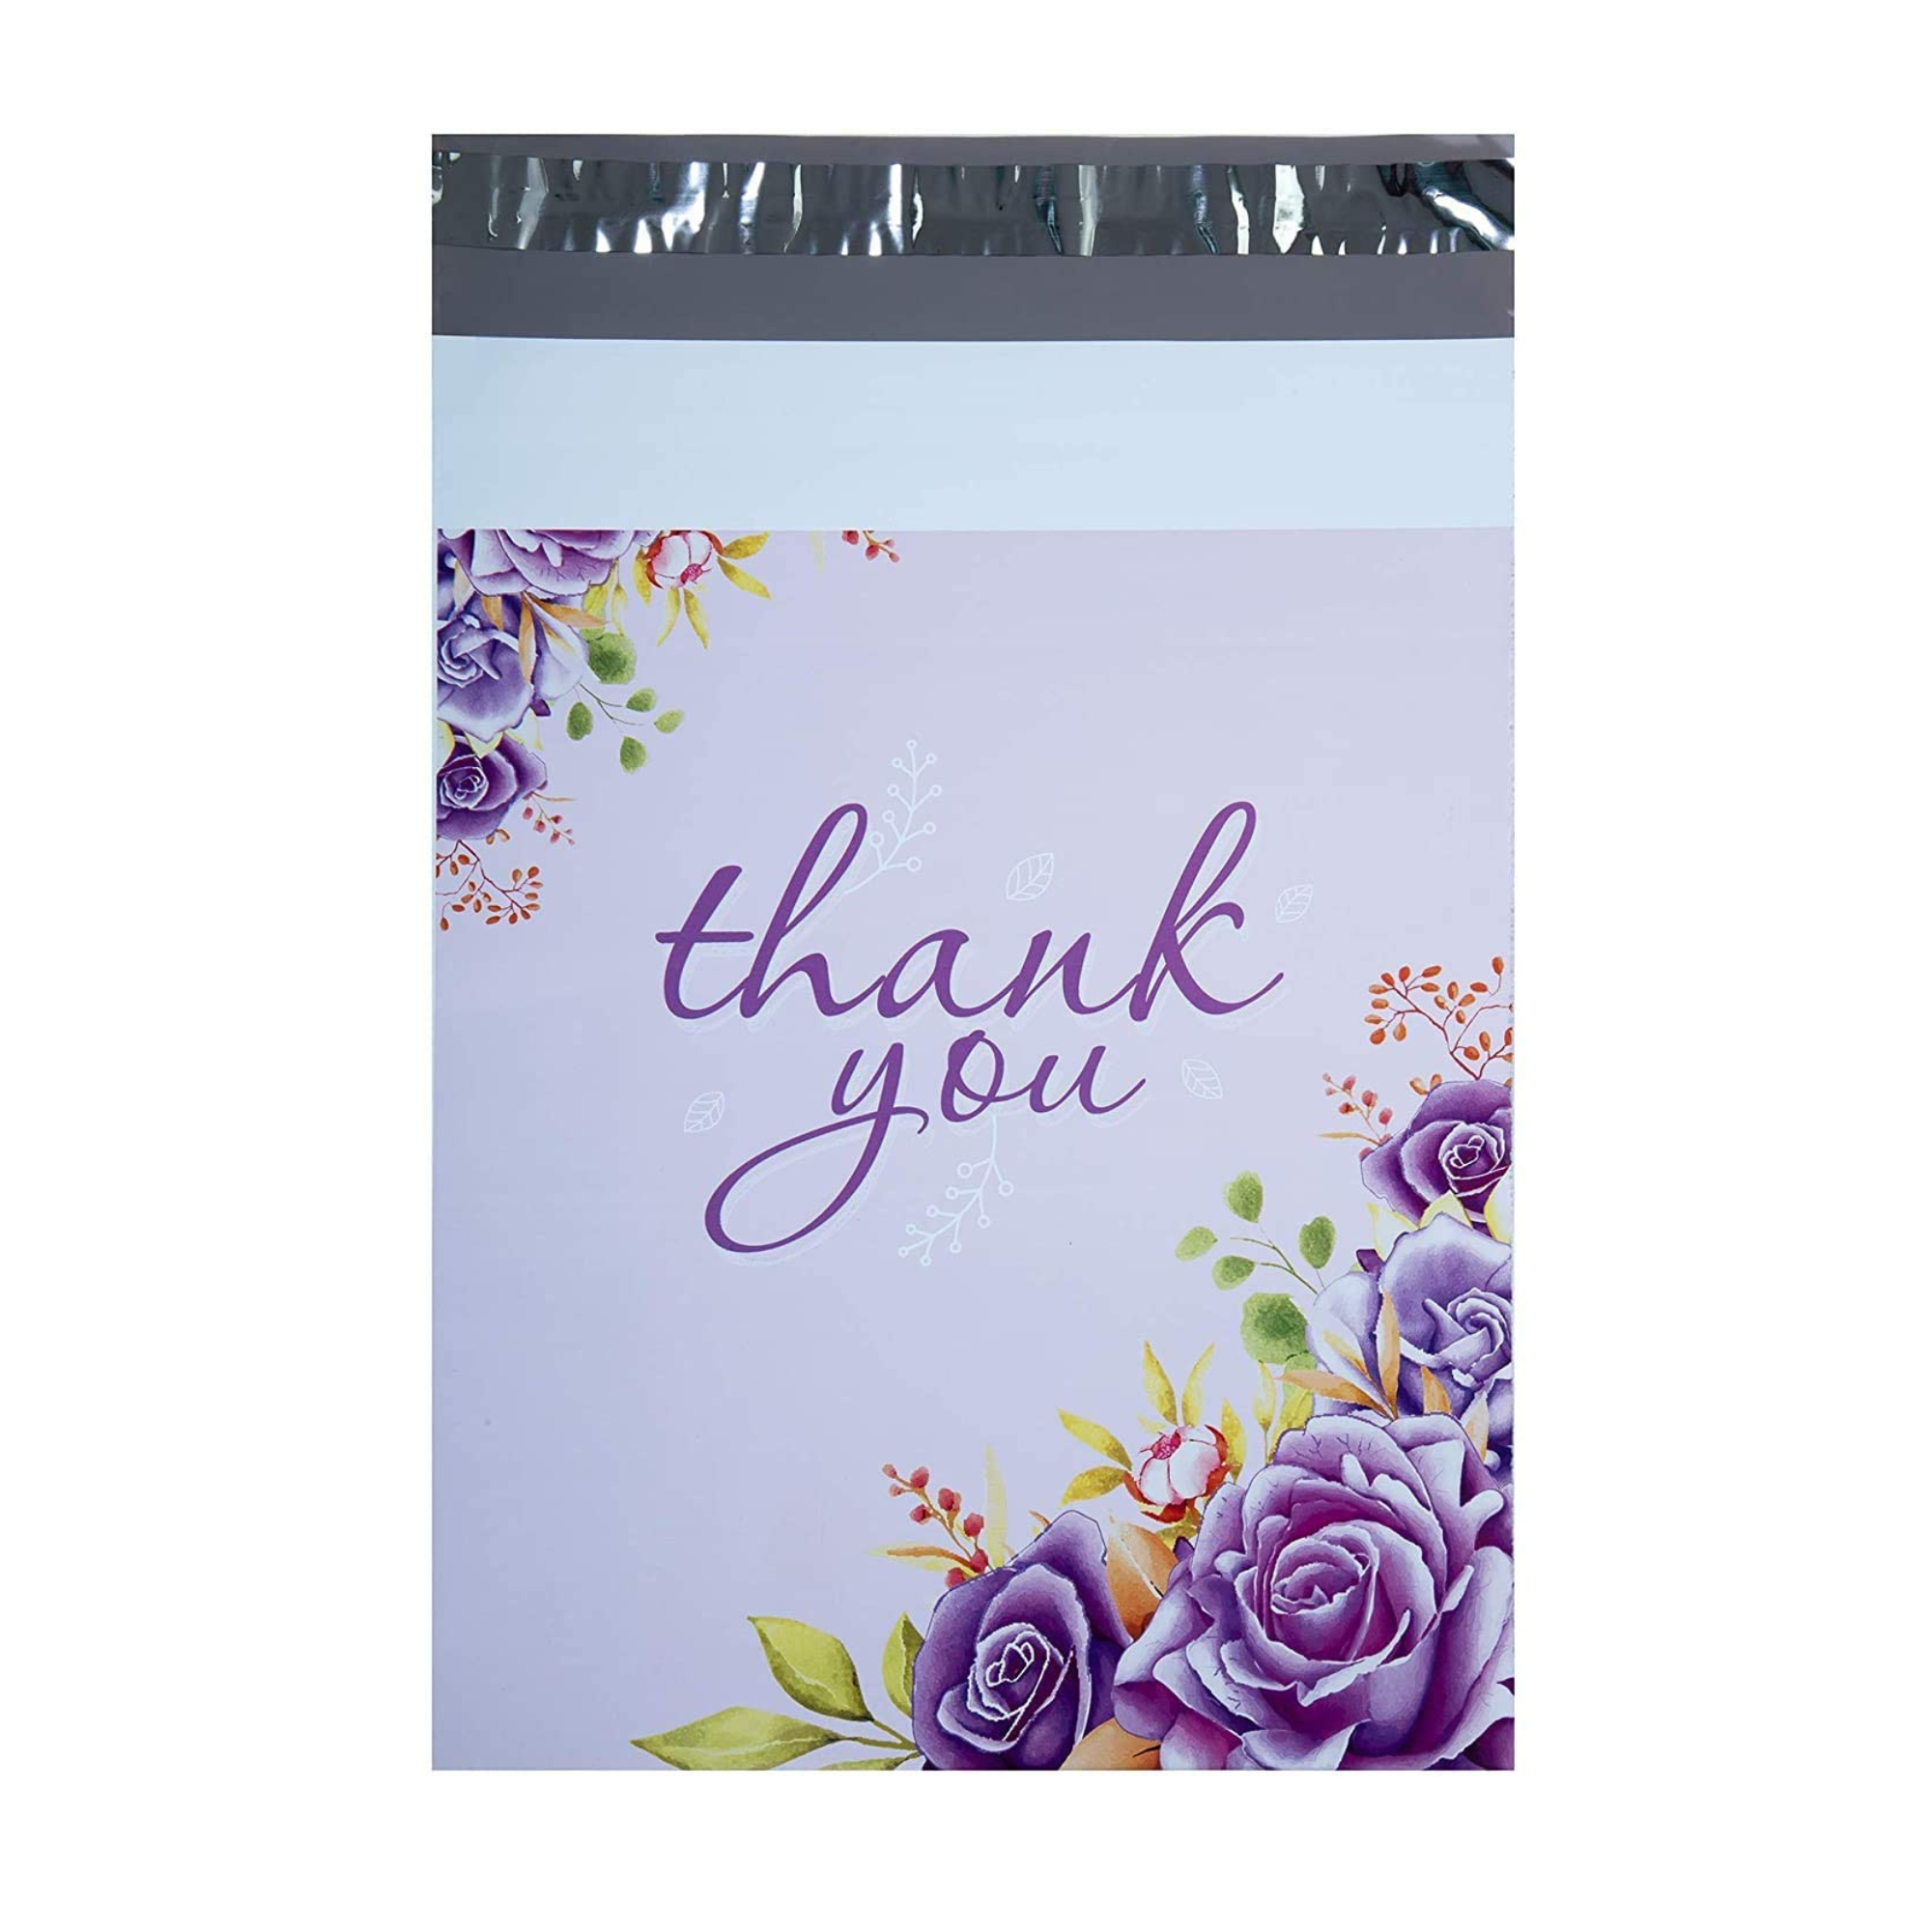 10 X 13 Pack of 100 Self Adhesive Flower Printed Thank You Poly Mailer Shipping Bags 2.25 Mil - Infinite Pack